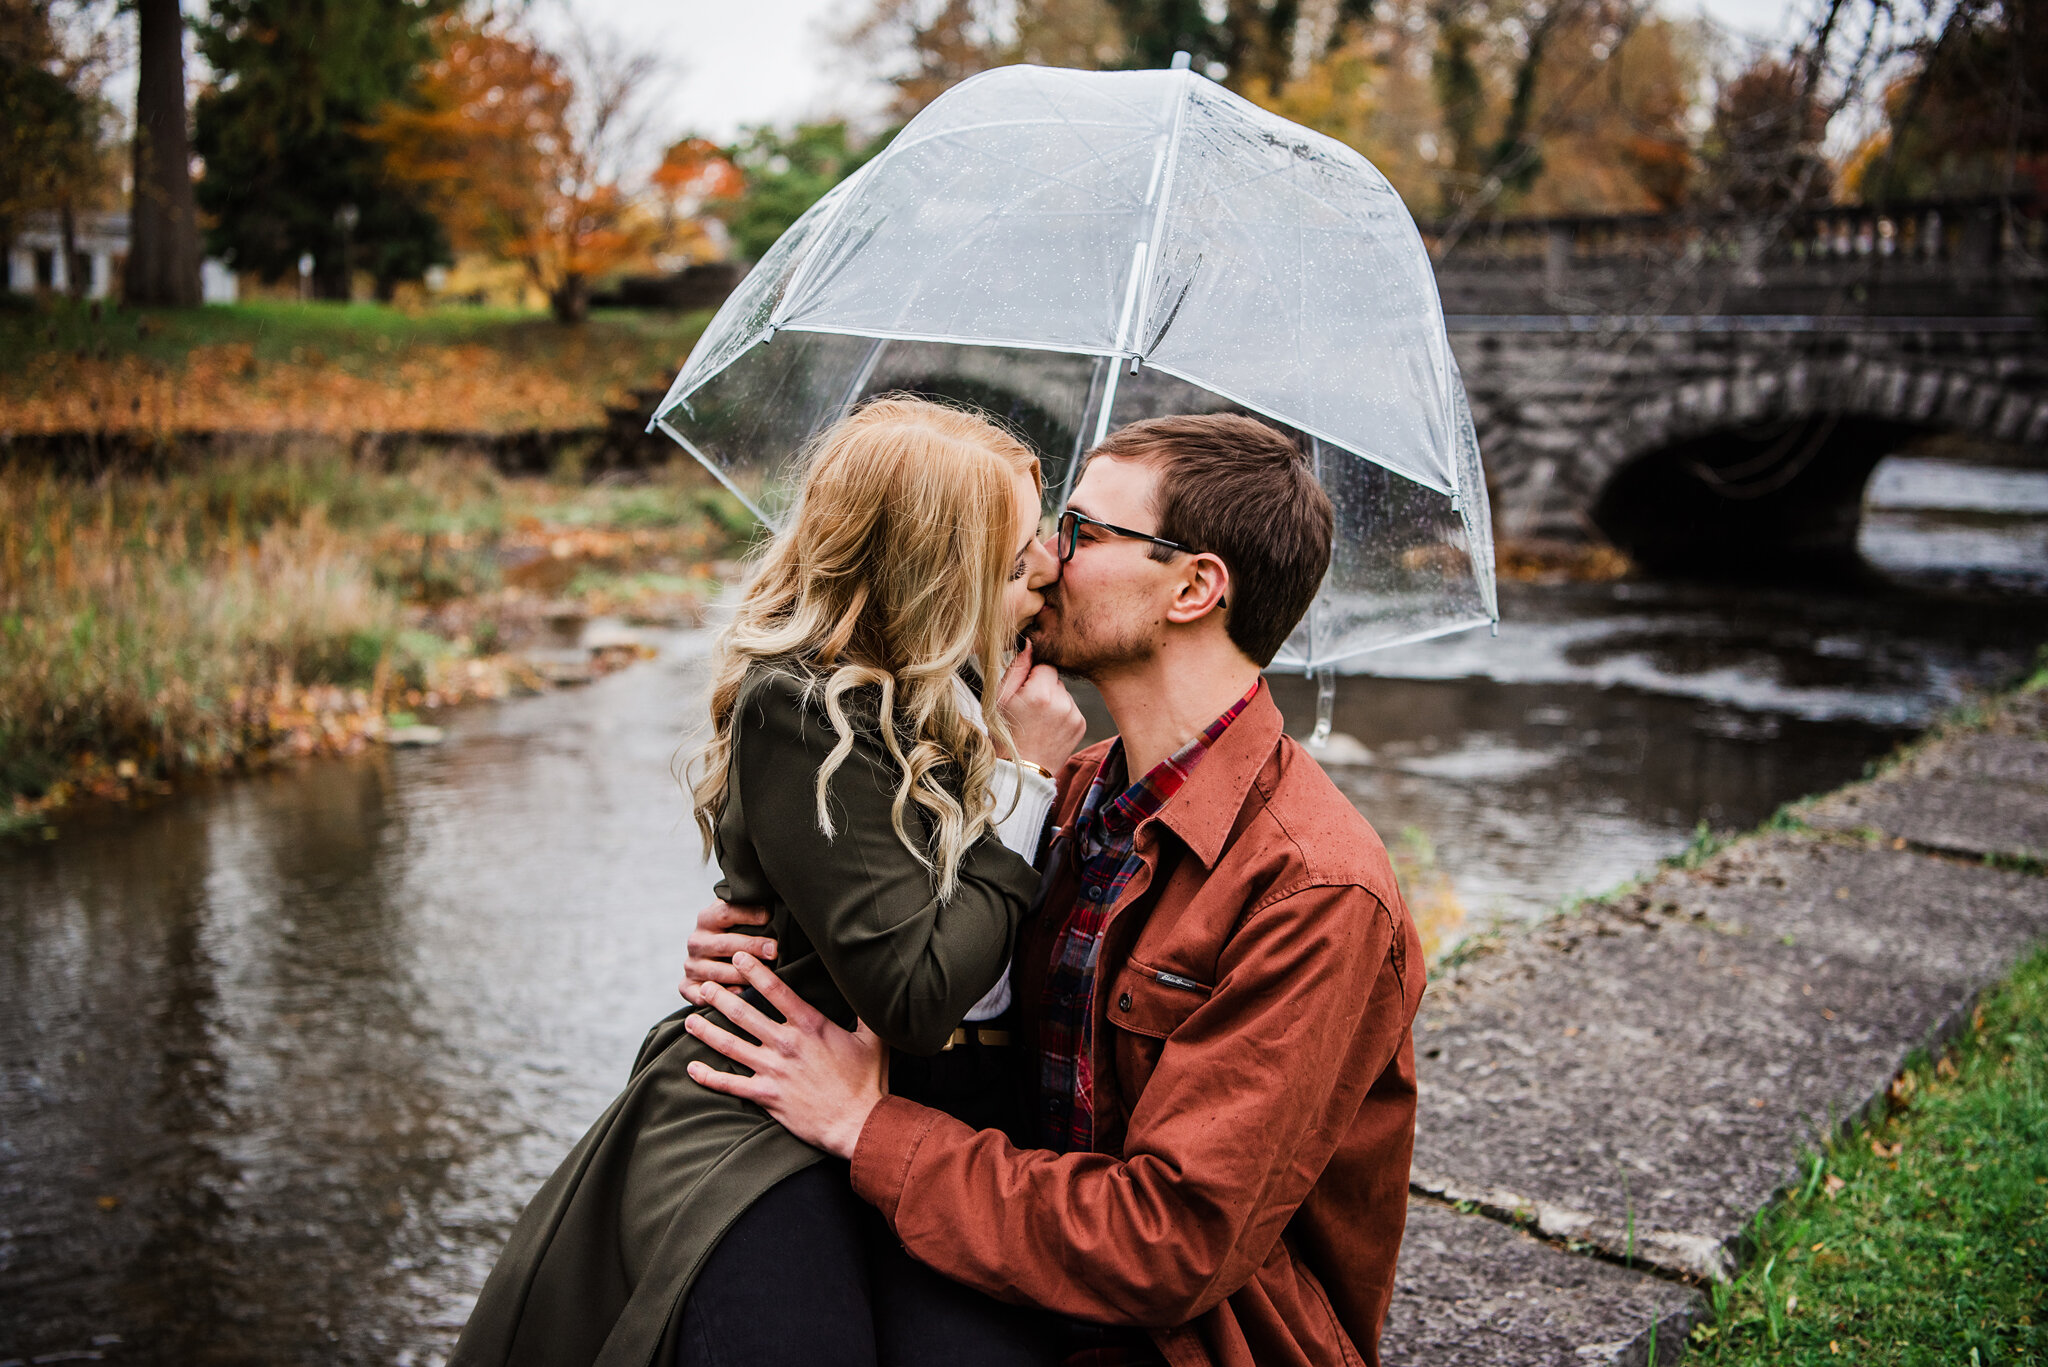 Forest_Lawn_Cemetery_Albright_Knox_Art_Gallery_Buffalo_Engagement_Session_JILL_STUDIO_Rochester_NY_Photographer_1187.jpg